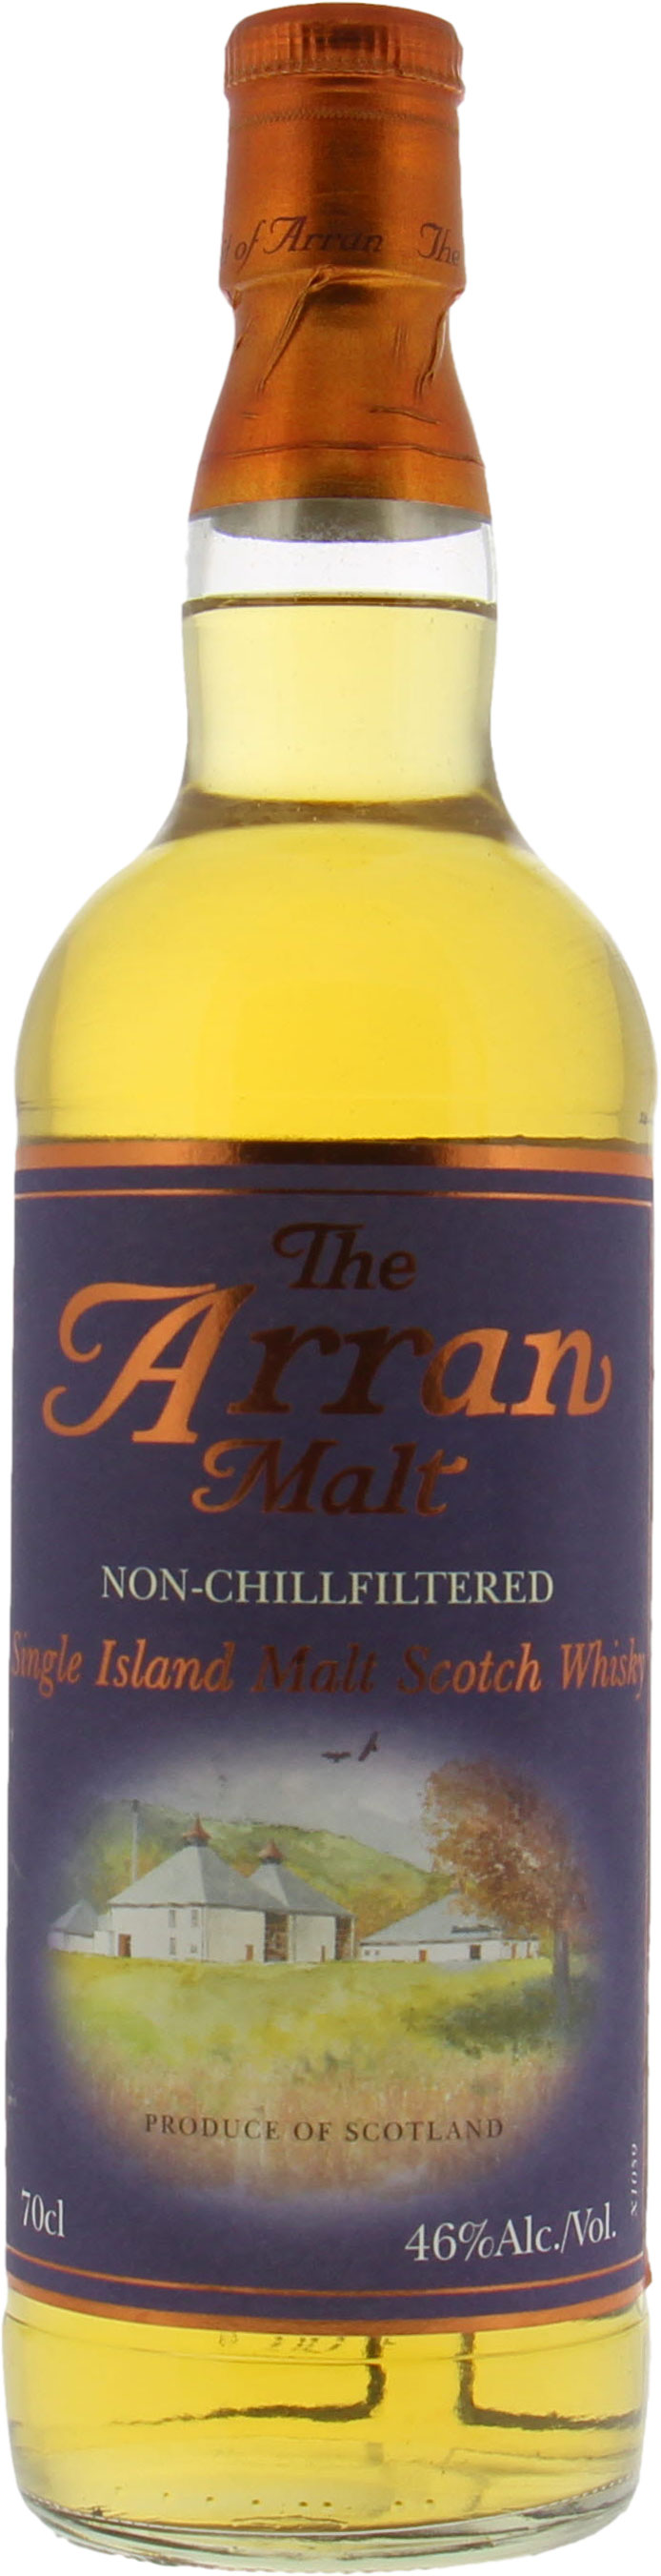 Arran - 7 years Old Non-Chillfiltered 46% NV Perfect